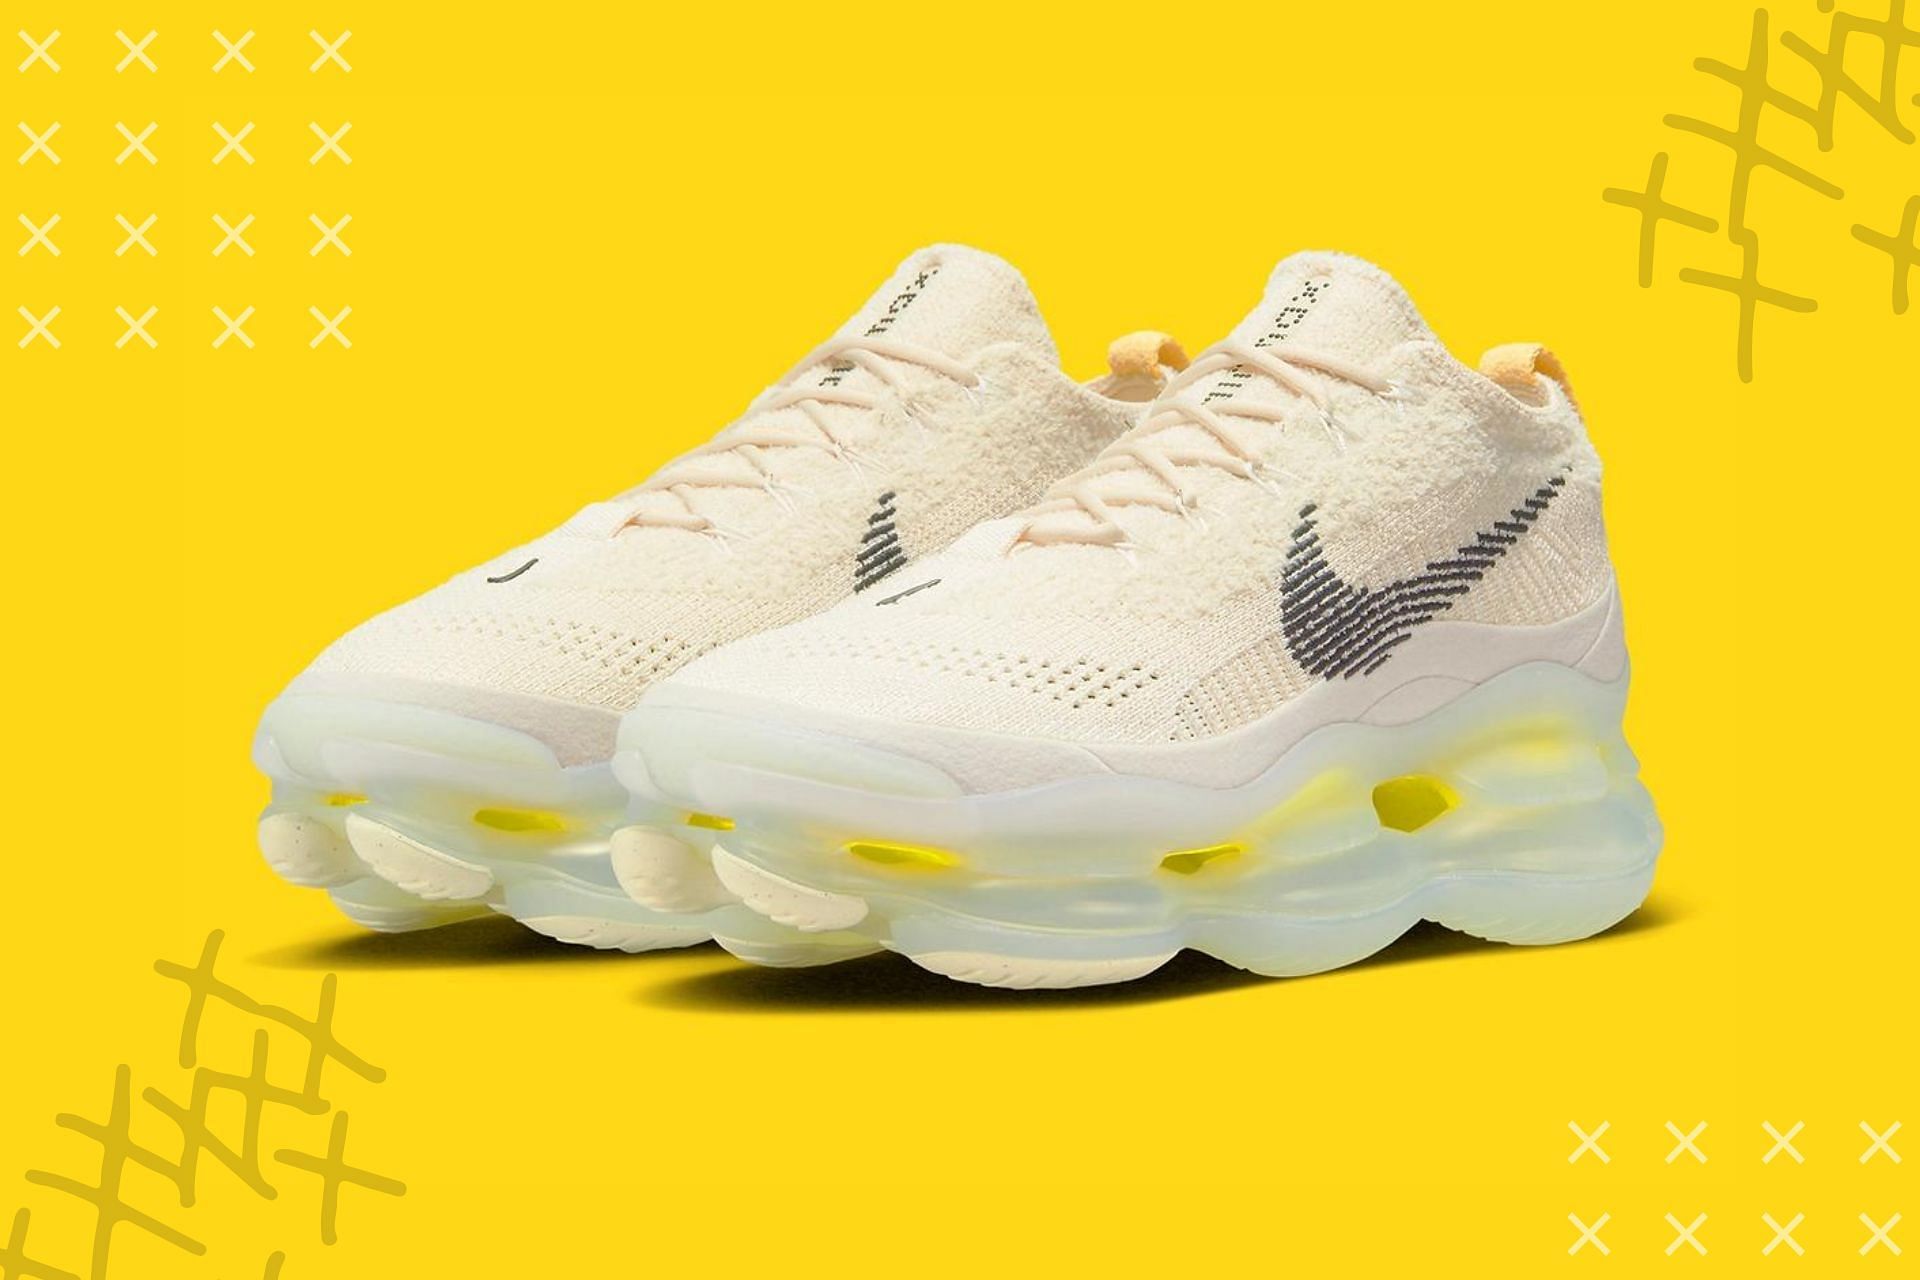 These shoes are also referred to as a Lemon Wash colorway (Image via Sportskeeda)